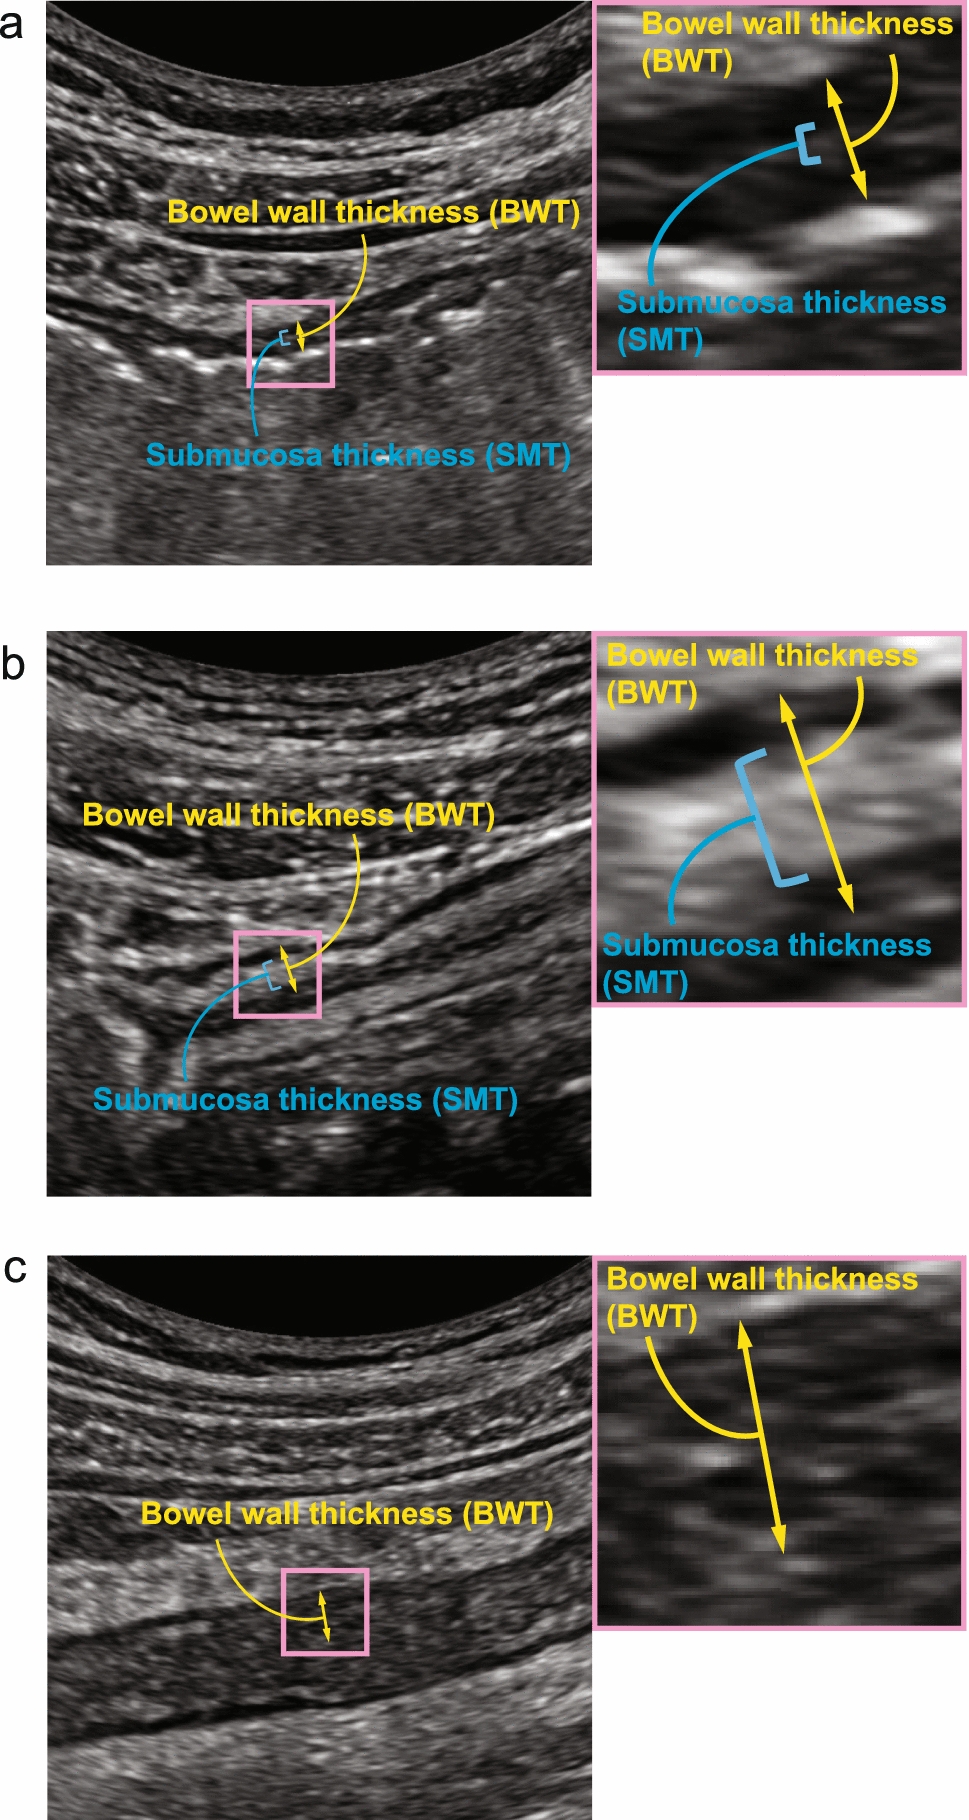 A combination of bowel wall thickness and submucosa index is useful for estimating endoscopic improvement in ulcerative colitis: external validation of the Kyorin Ultrasound Criterion